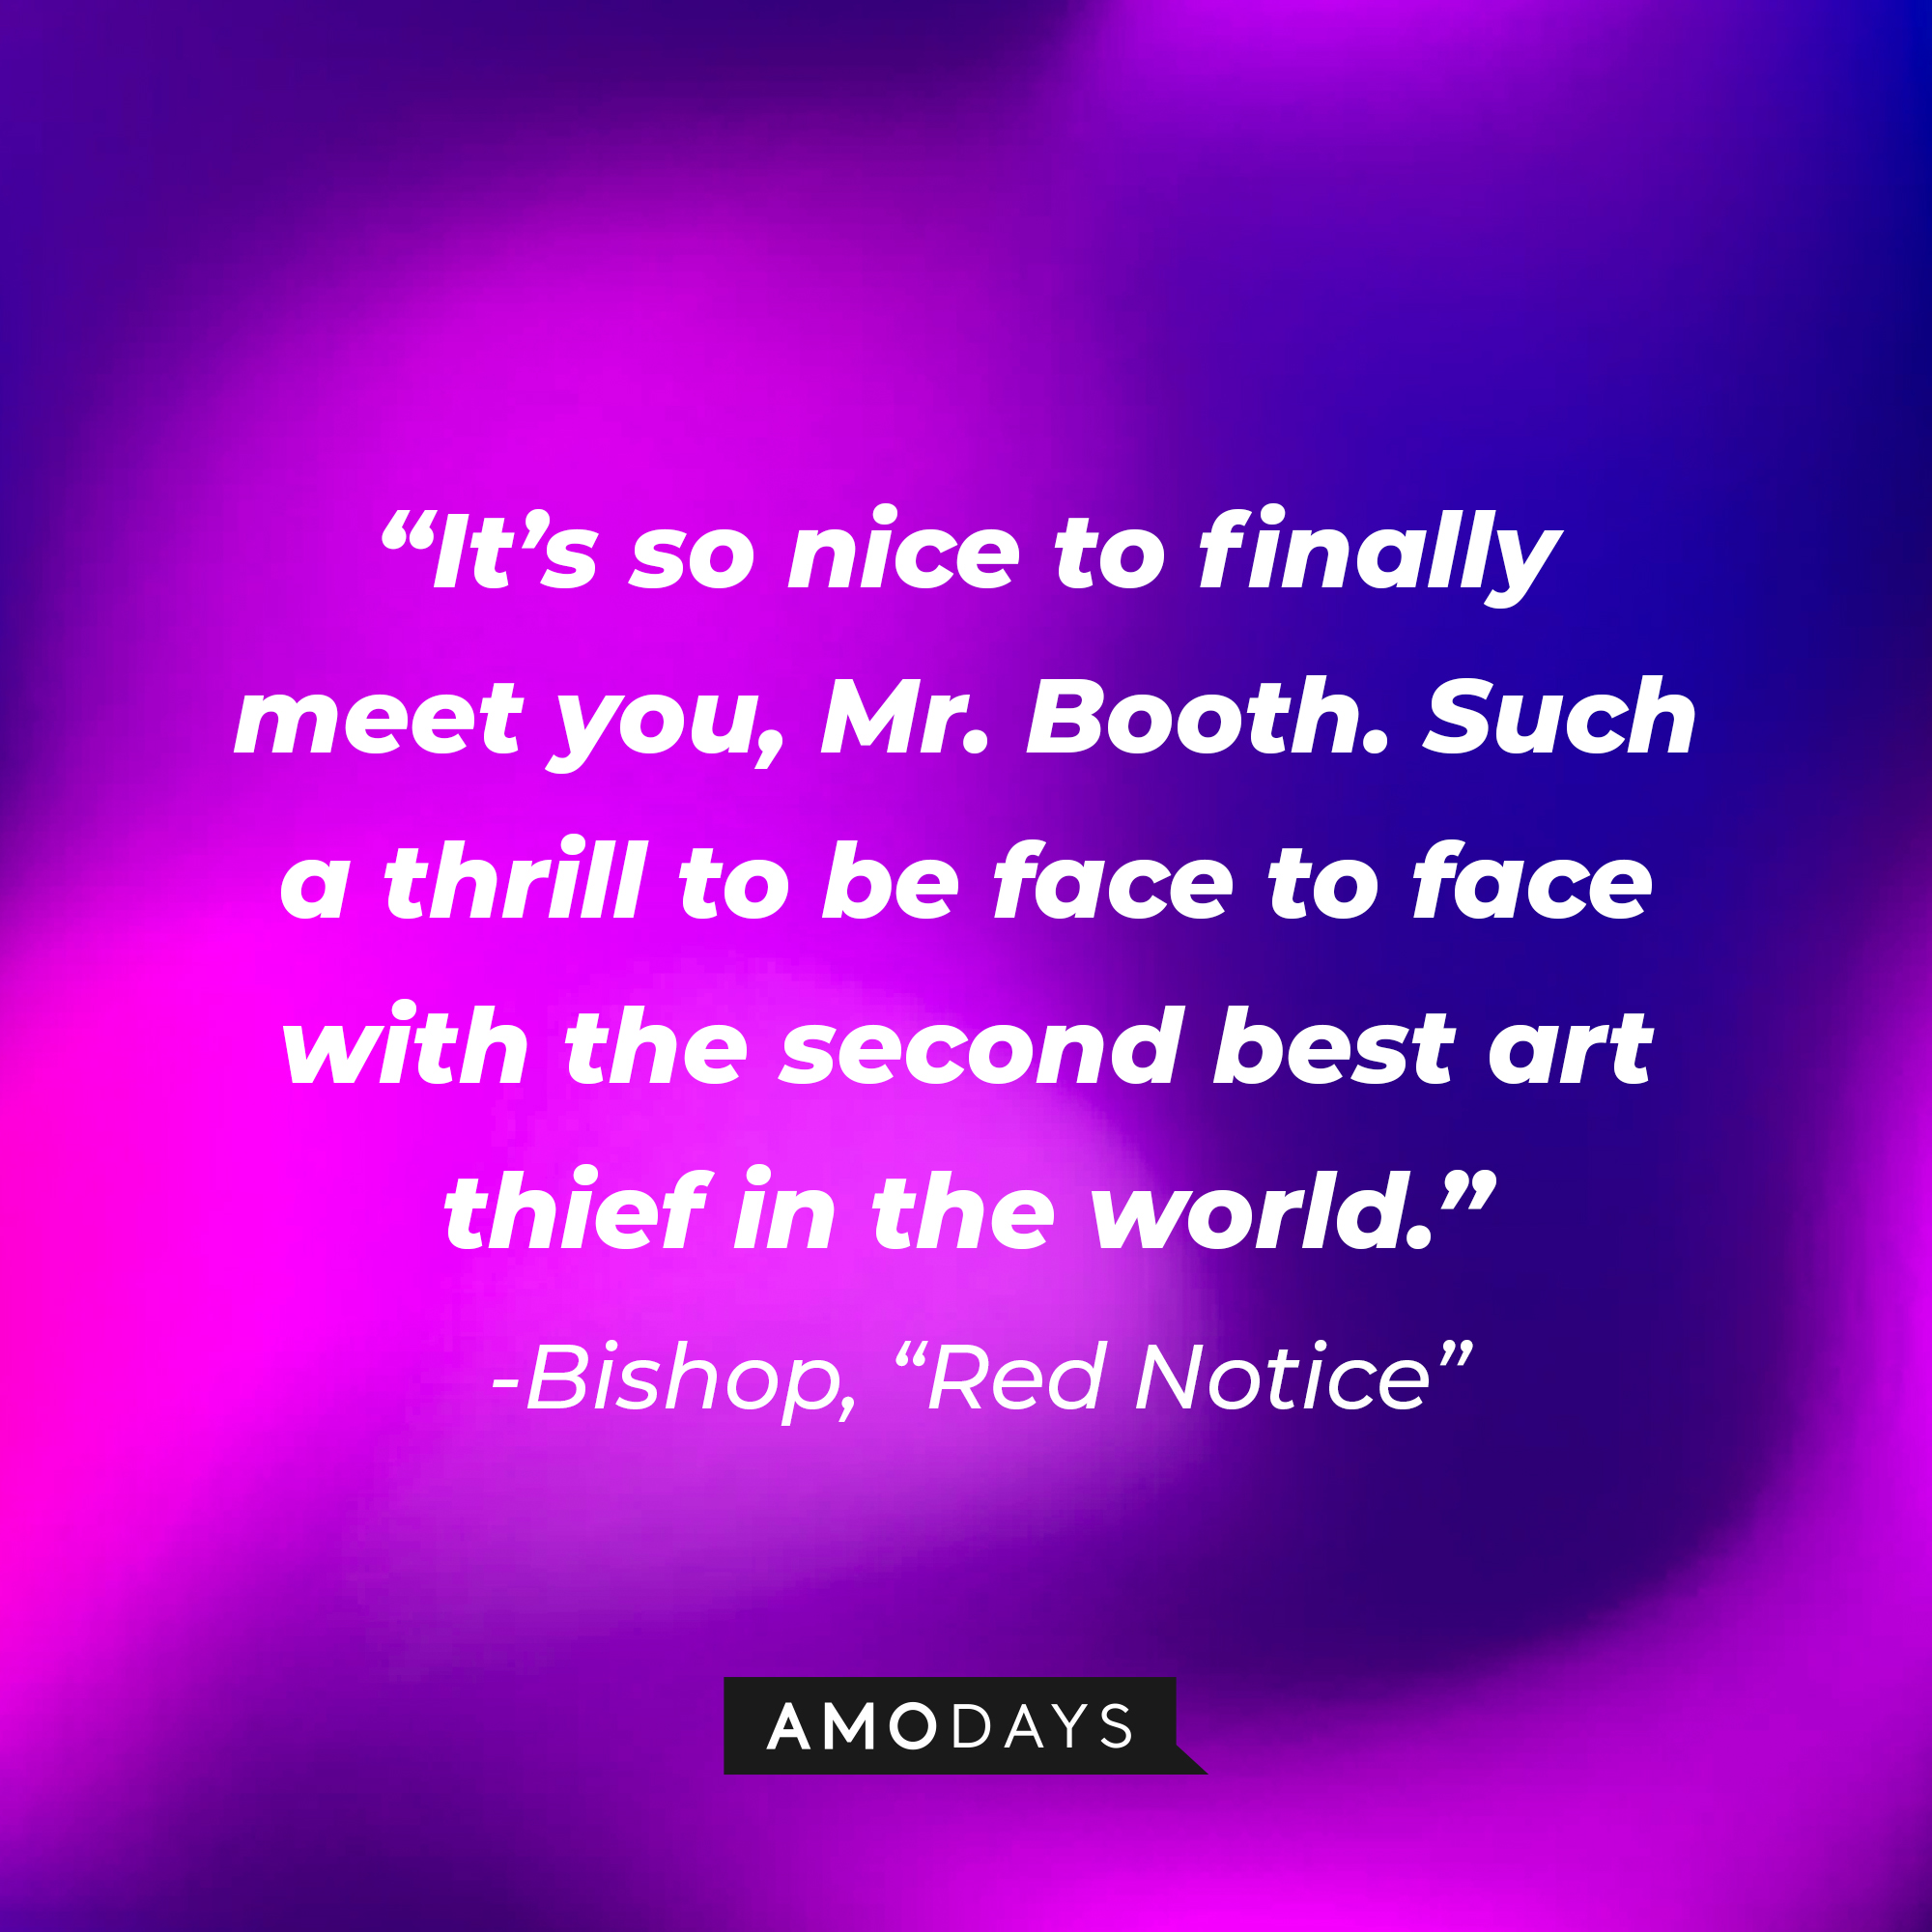 Bishop's quote from "Red Notice:" It’s so nice to finally meet you, Mr. Booth. Such a thrill to be face to face with the second best art thief in the world.” | Source: AmoDays